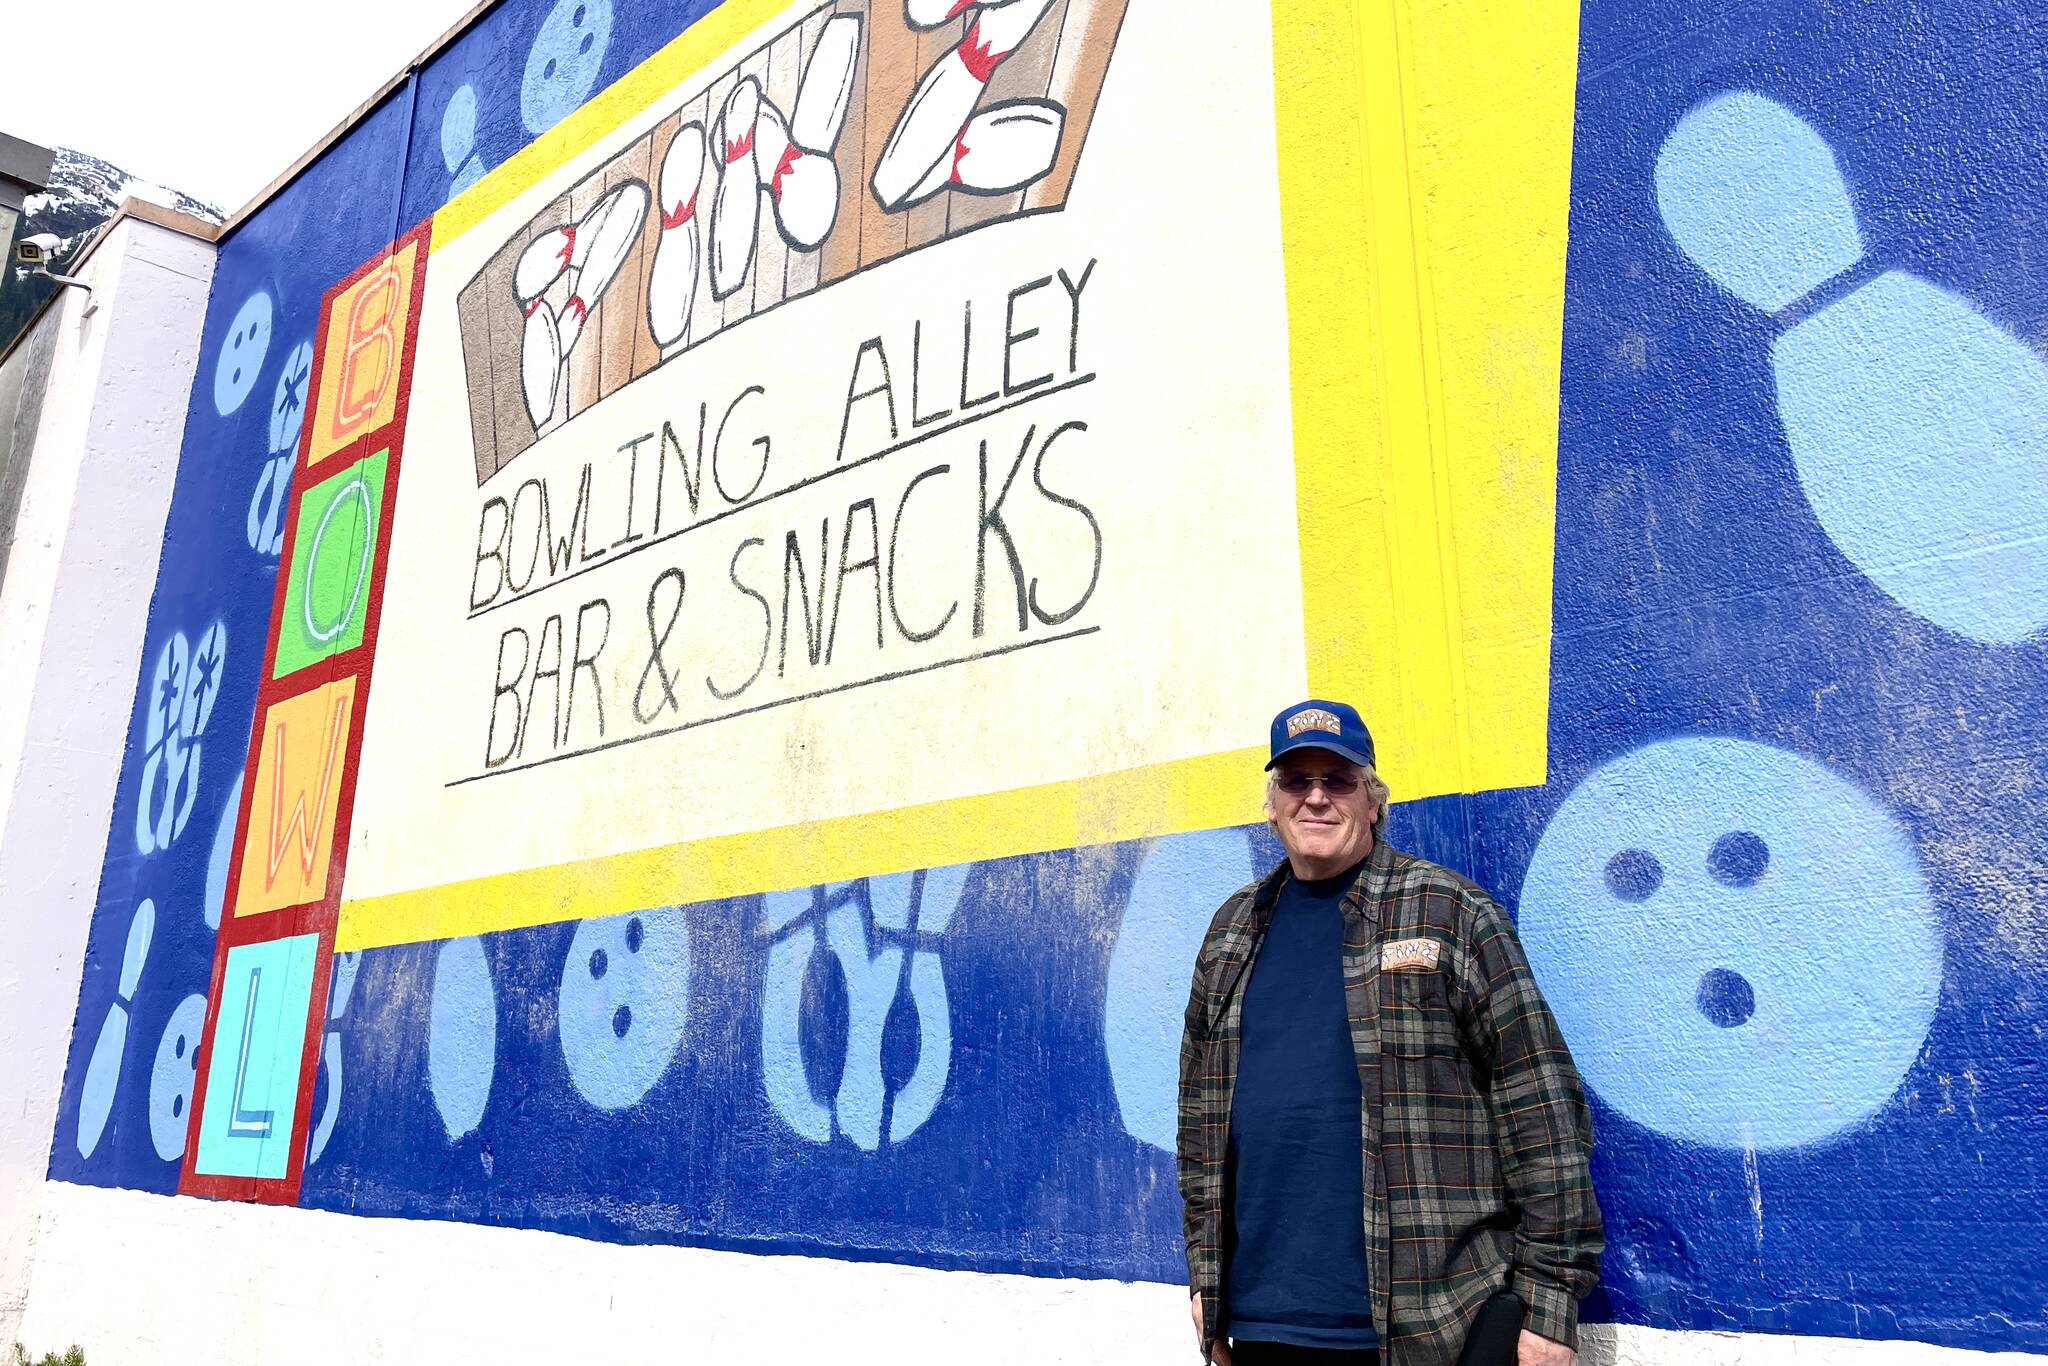 Bob Petersen has spent the last several years restoring and upgrading the bowling alley after previous management left it in ill repair, including commissioning a new mural for the outside wall. (Michael S. Lockett / Juneau Empire)